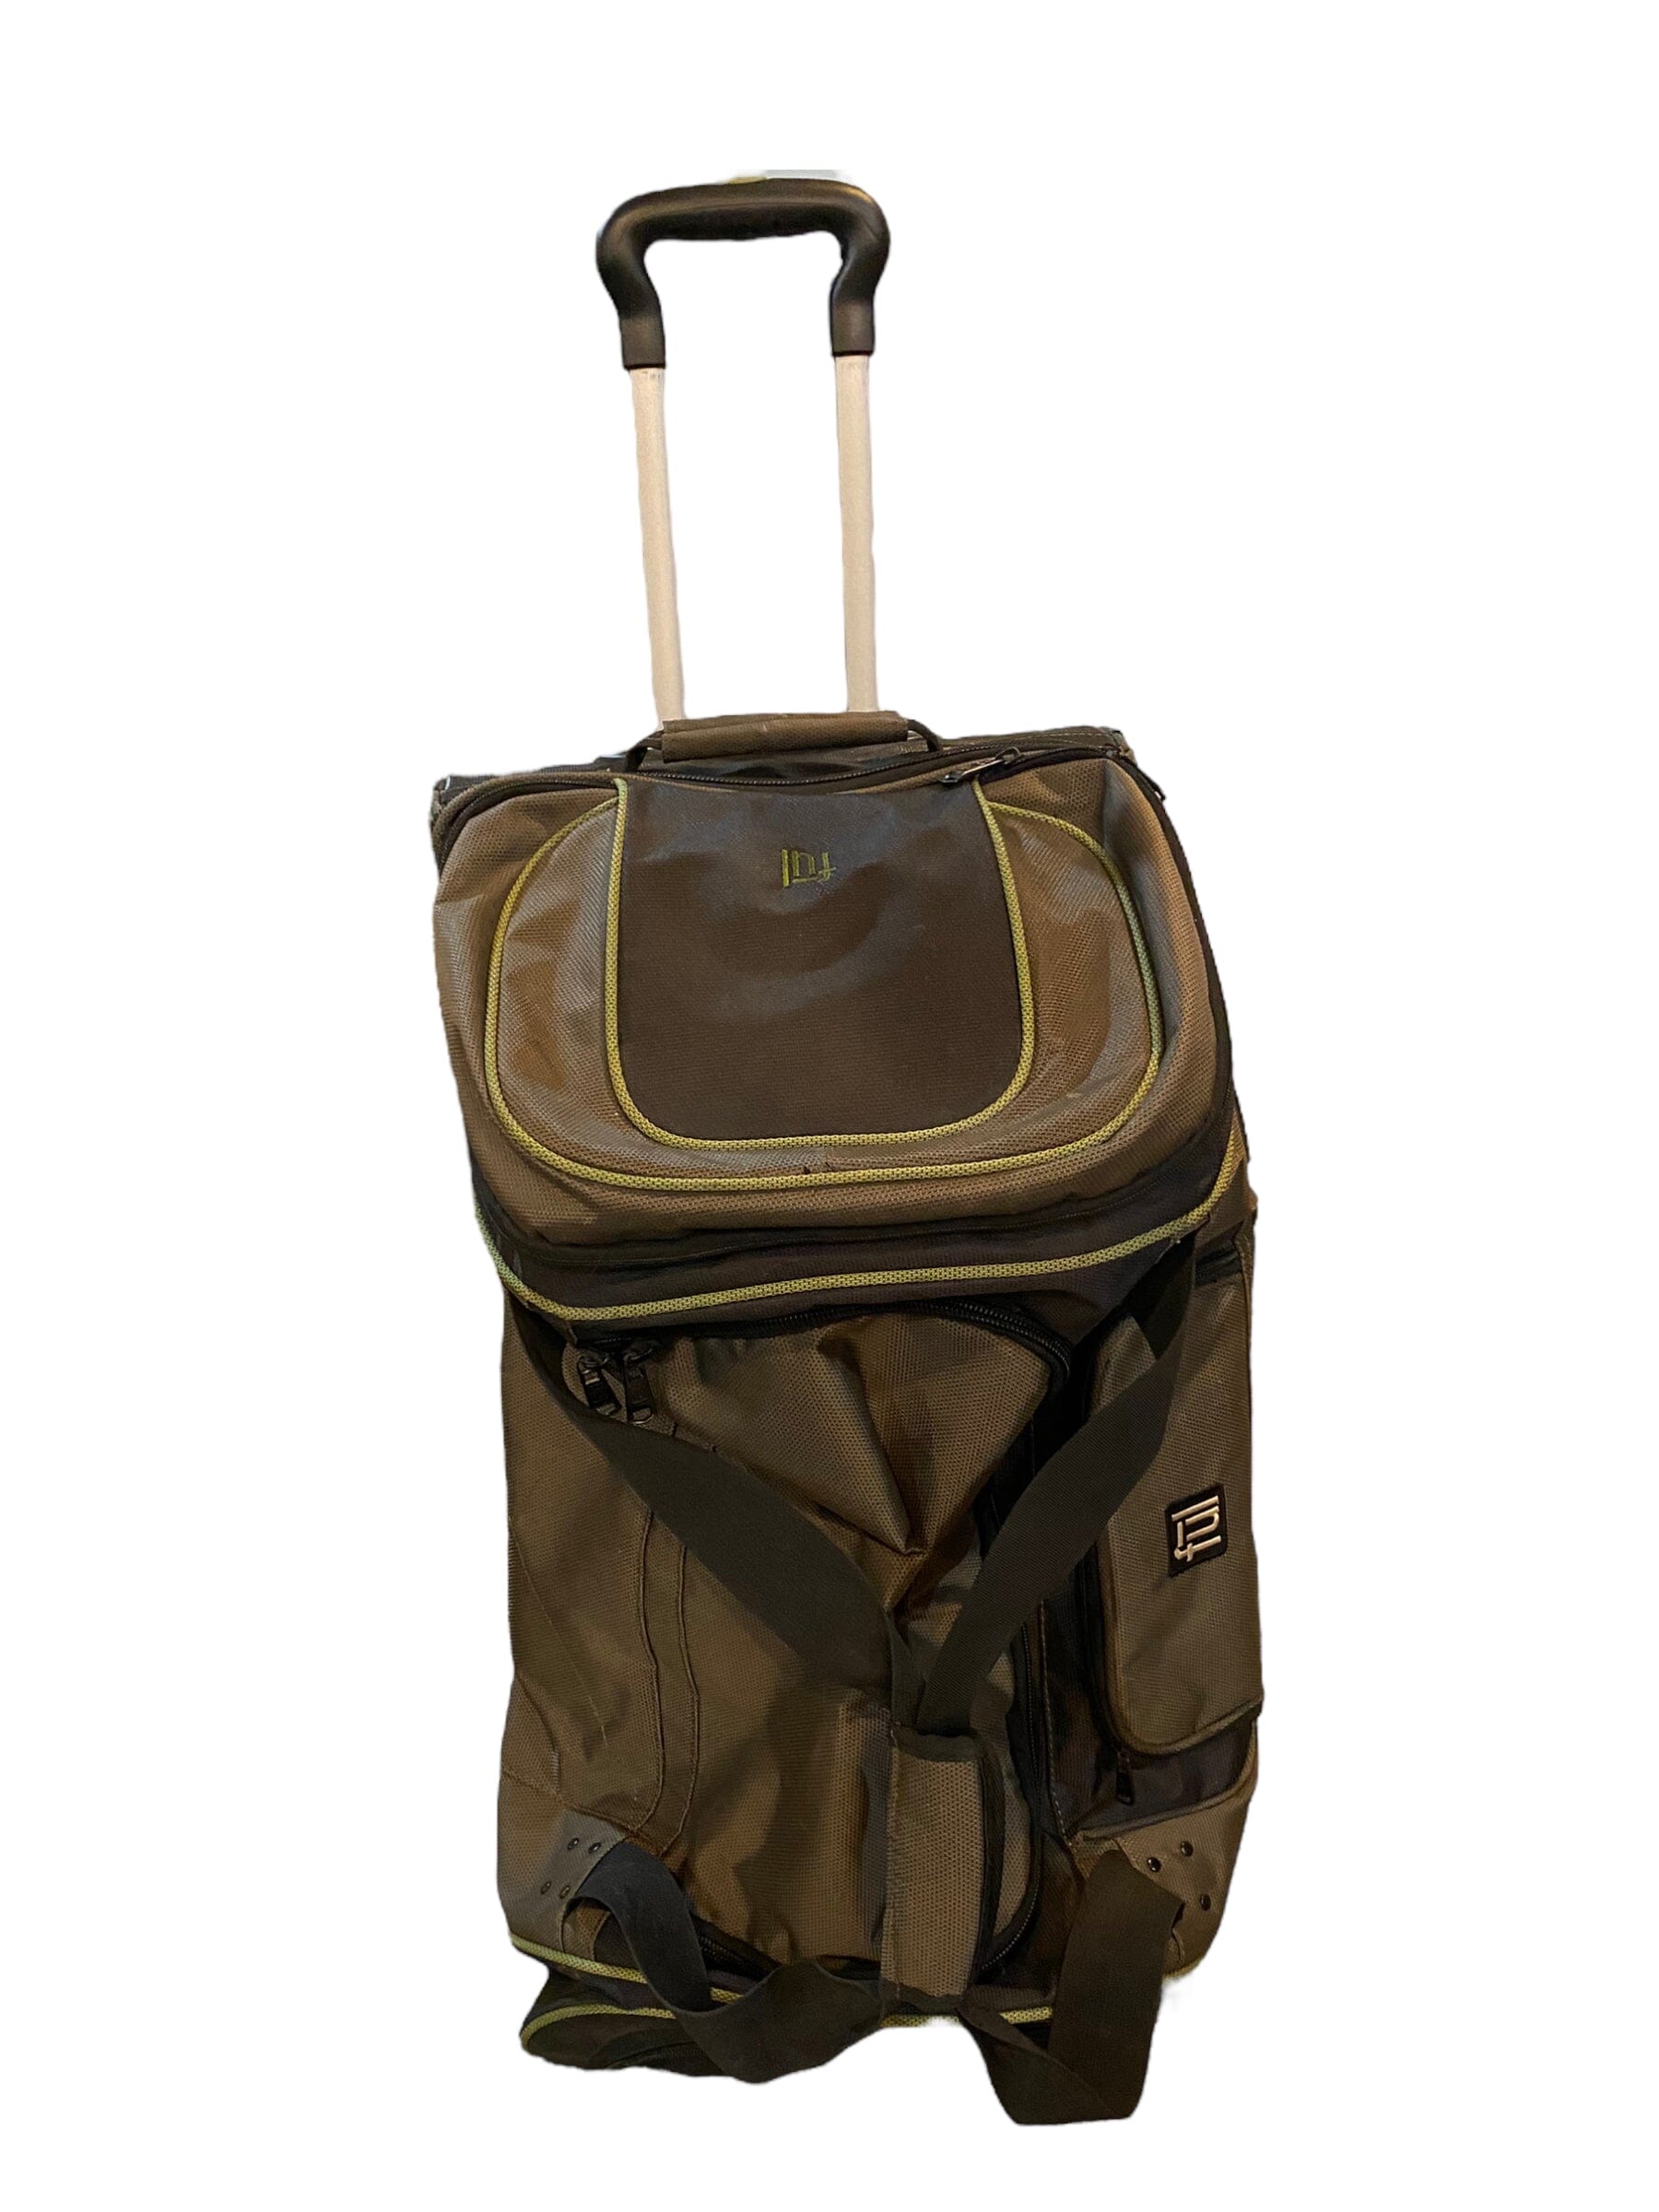 Used FUL Rig 30in Rolling Duffel Bag CPXBrosPaintball 